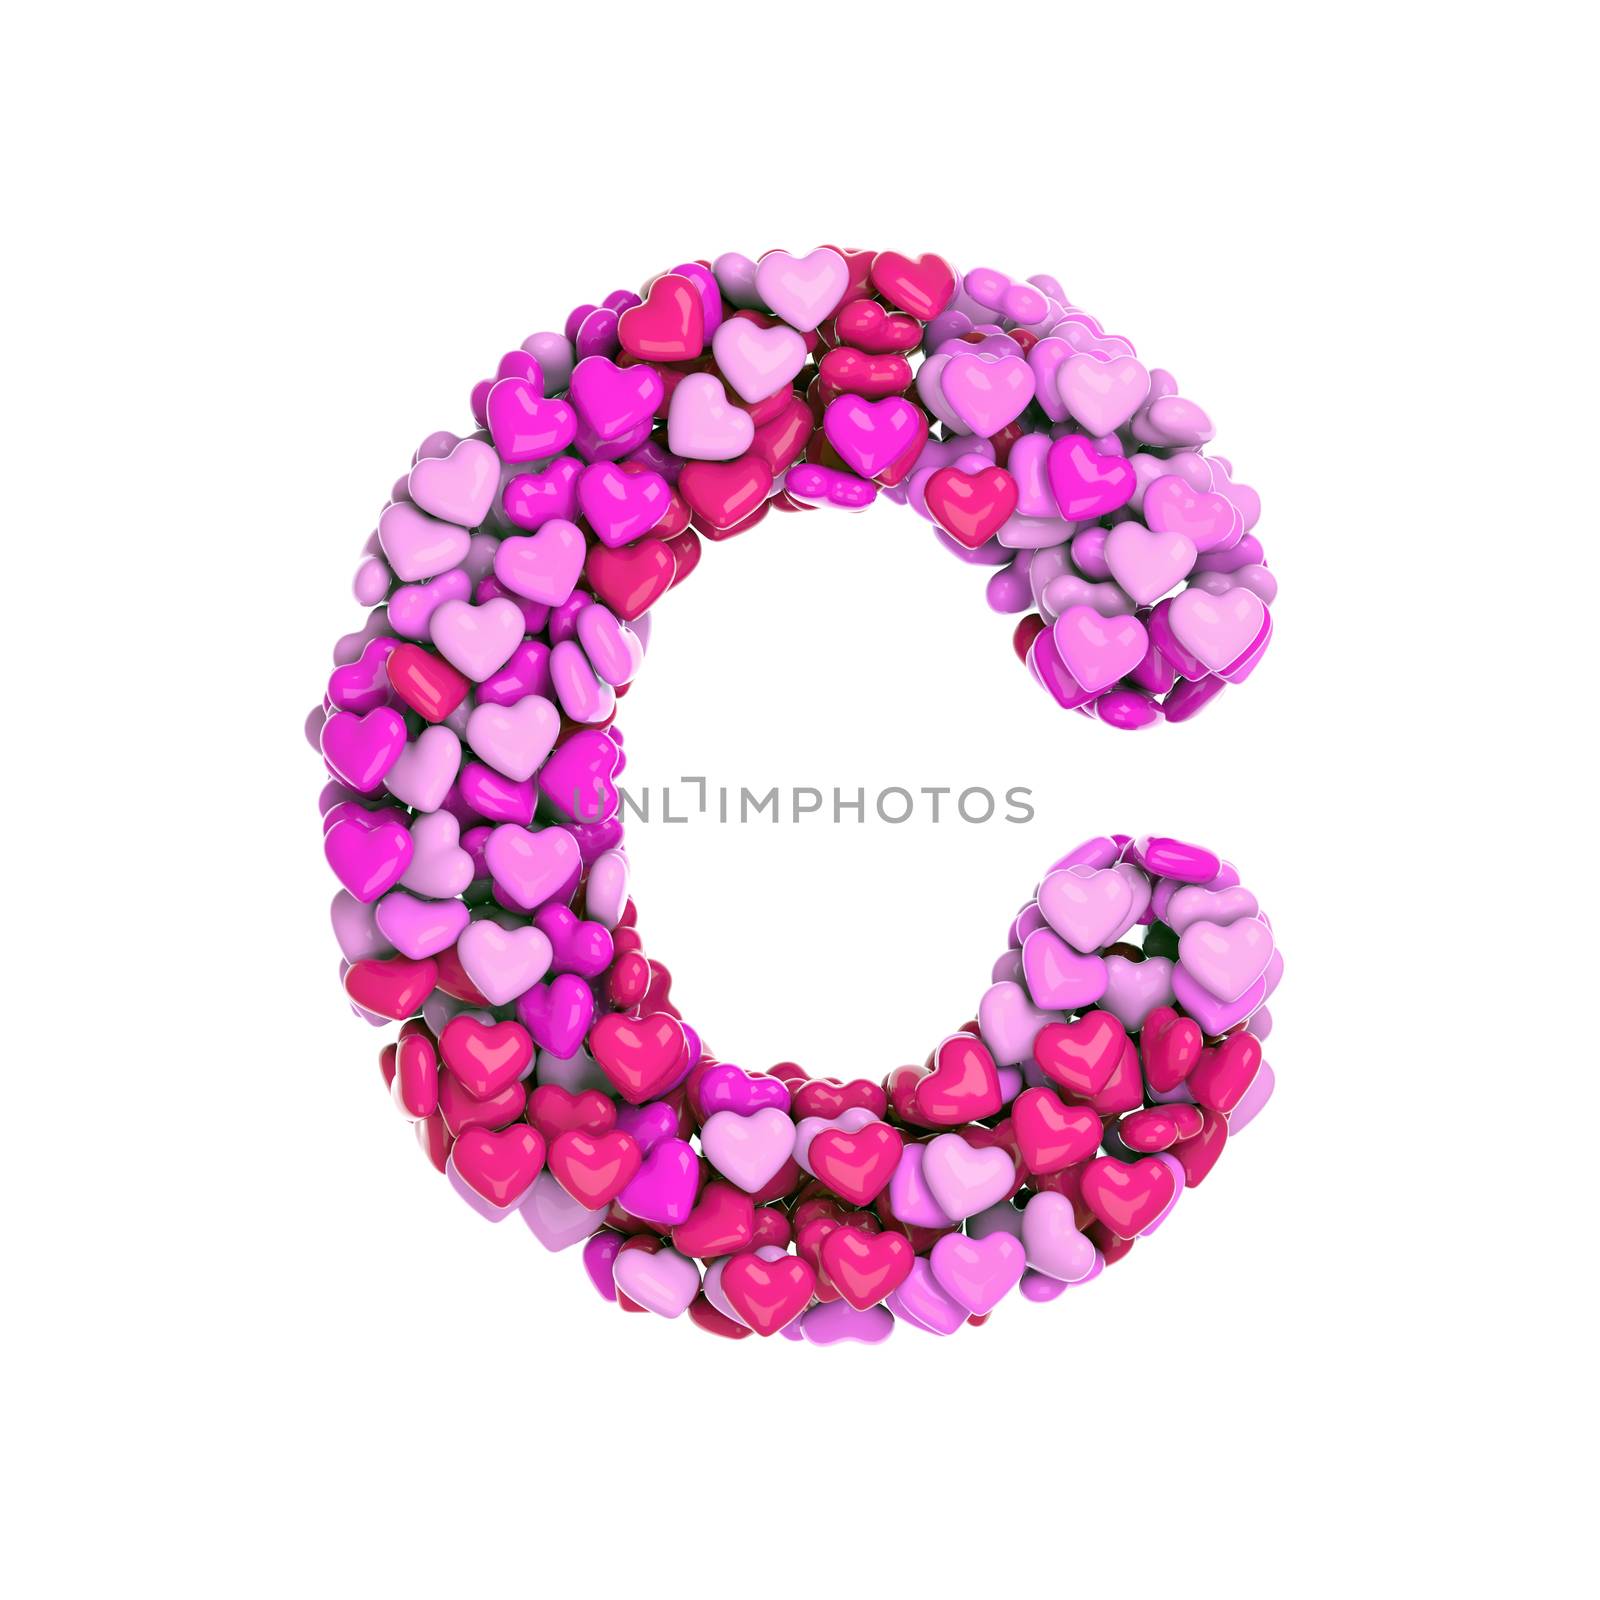 Valentine letter C - Capital 3d pink hearts font - Love, passion or wedding concept by chrisroll